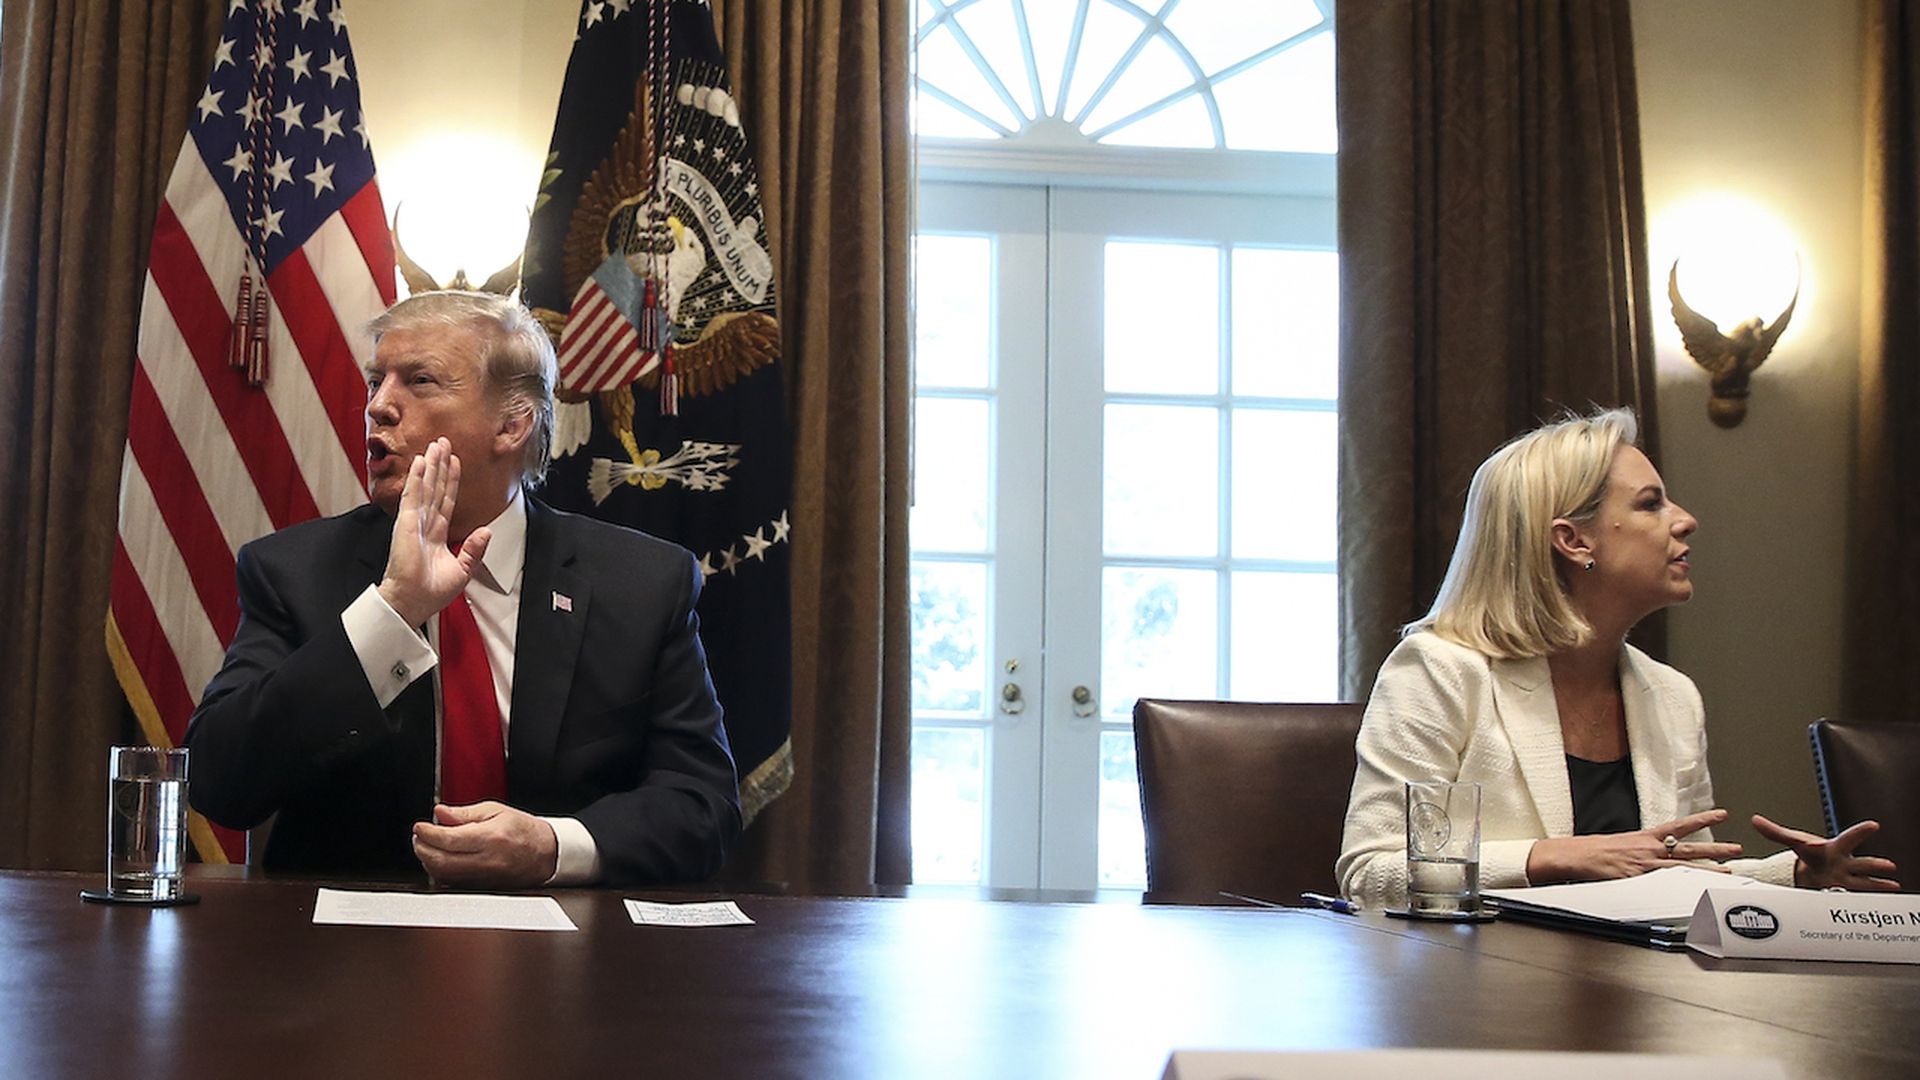 Donald Trump and Kirstjen Nielsen looking in opposite directions, with a table in the foreground